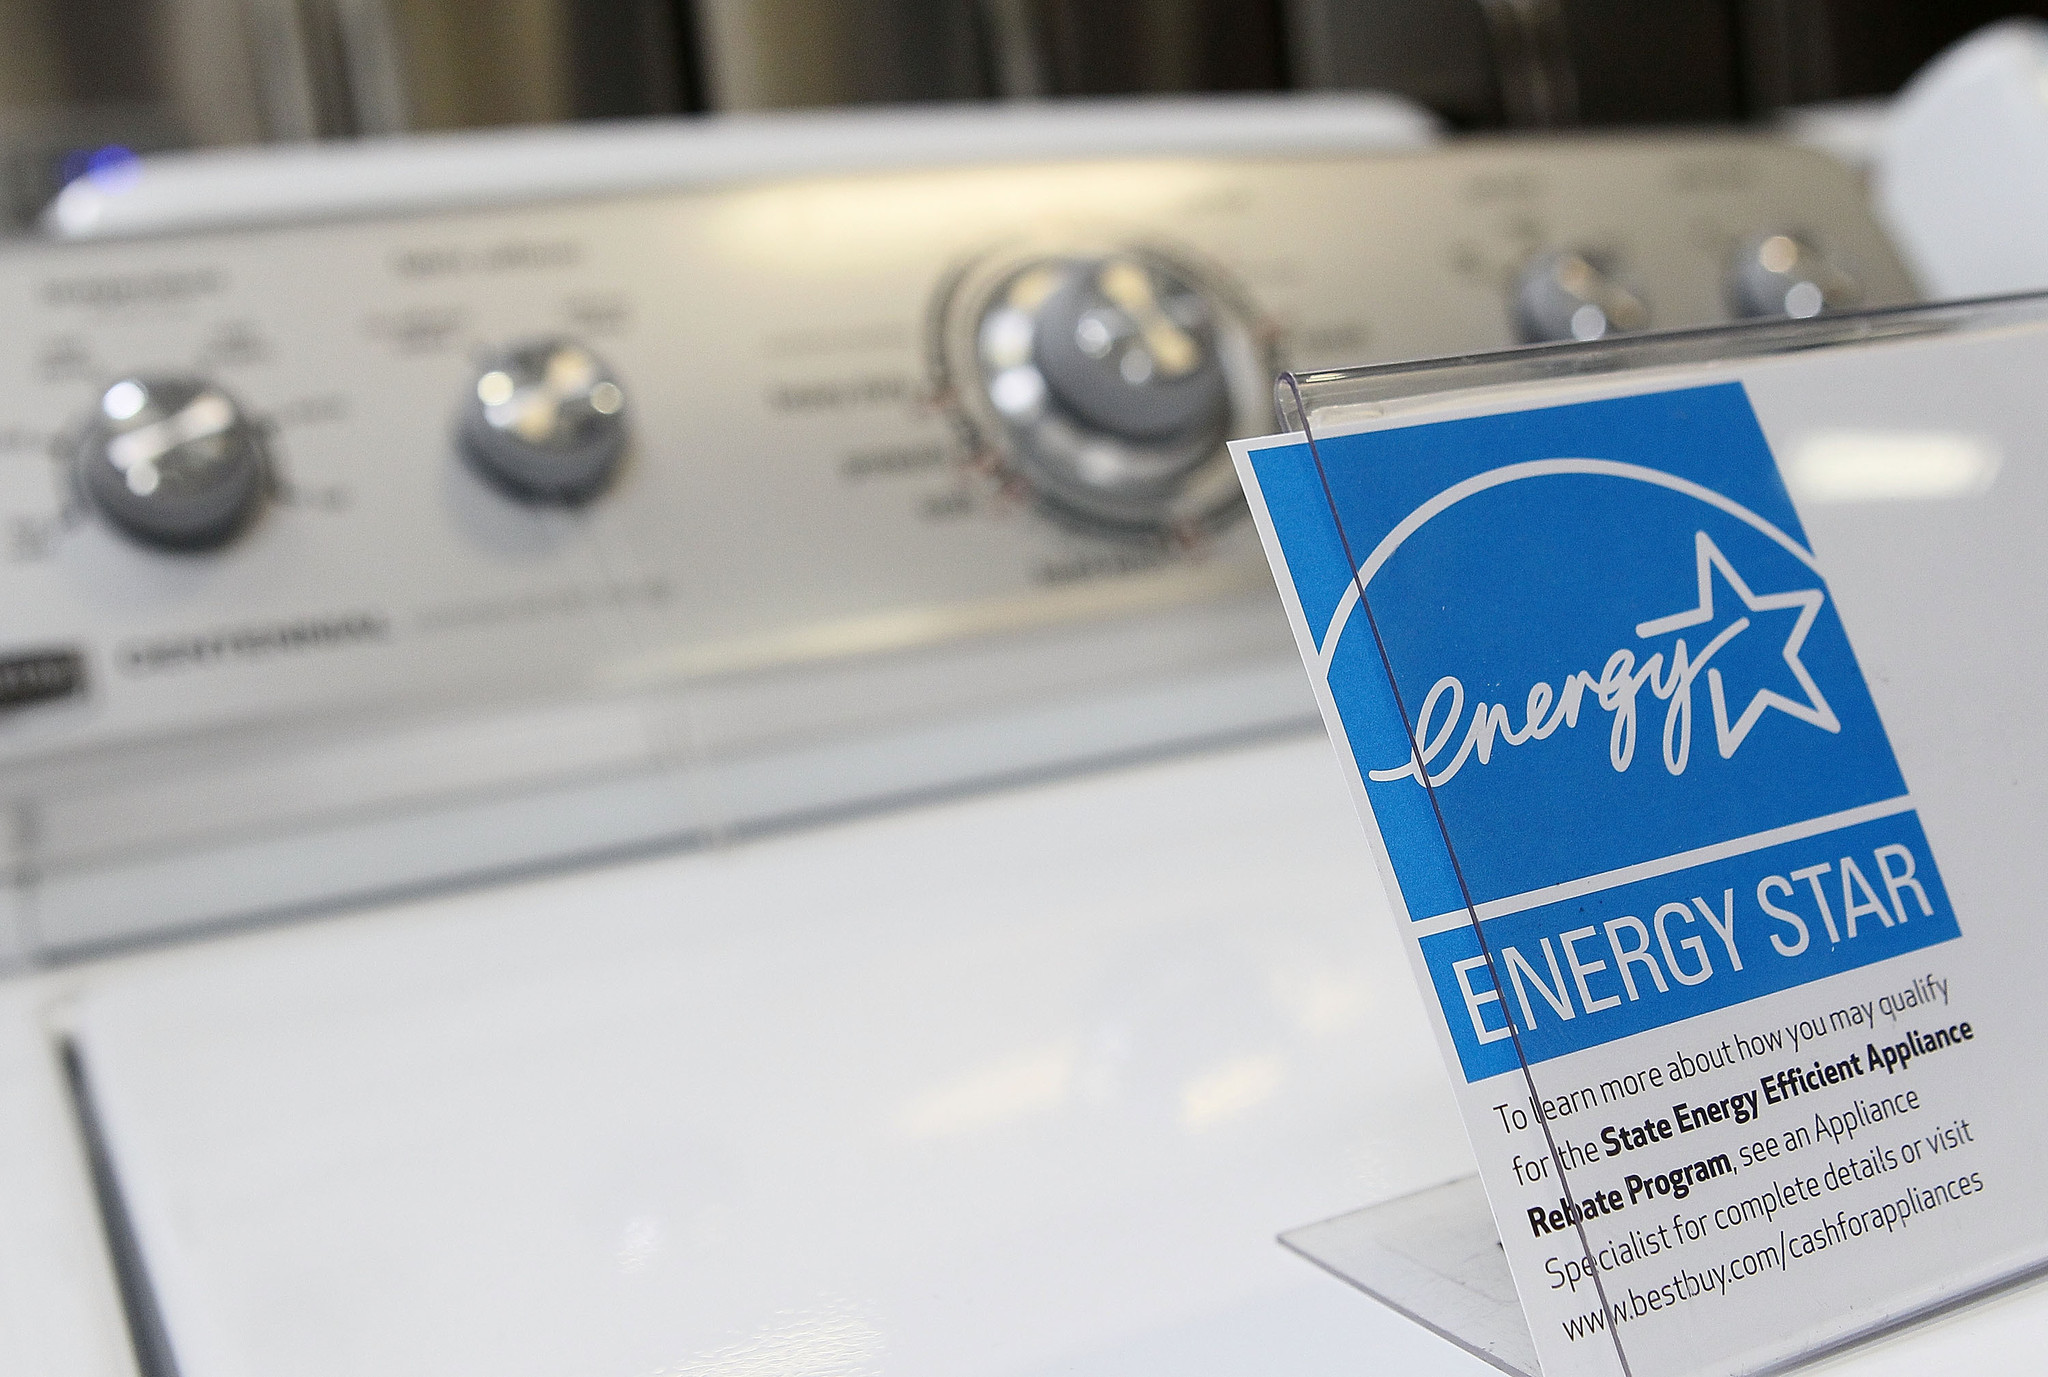 Florida Tax Holiday On Energy Star Appliances And WaterSense Products 